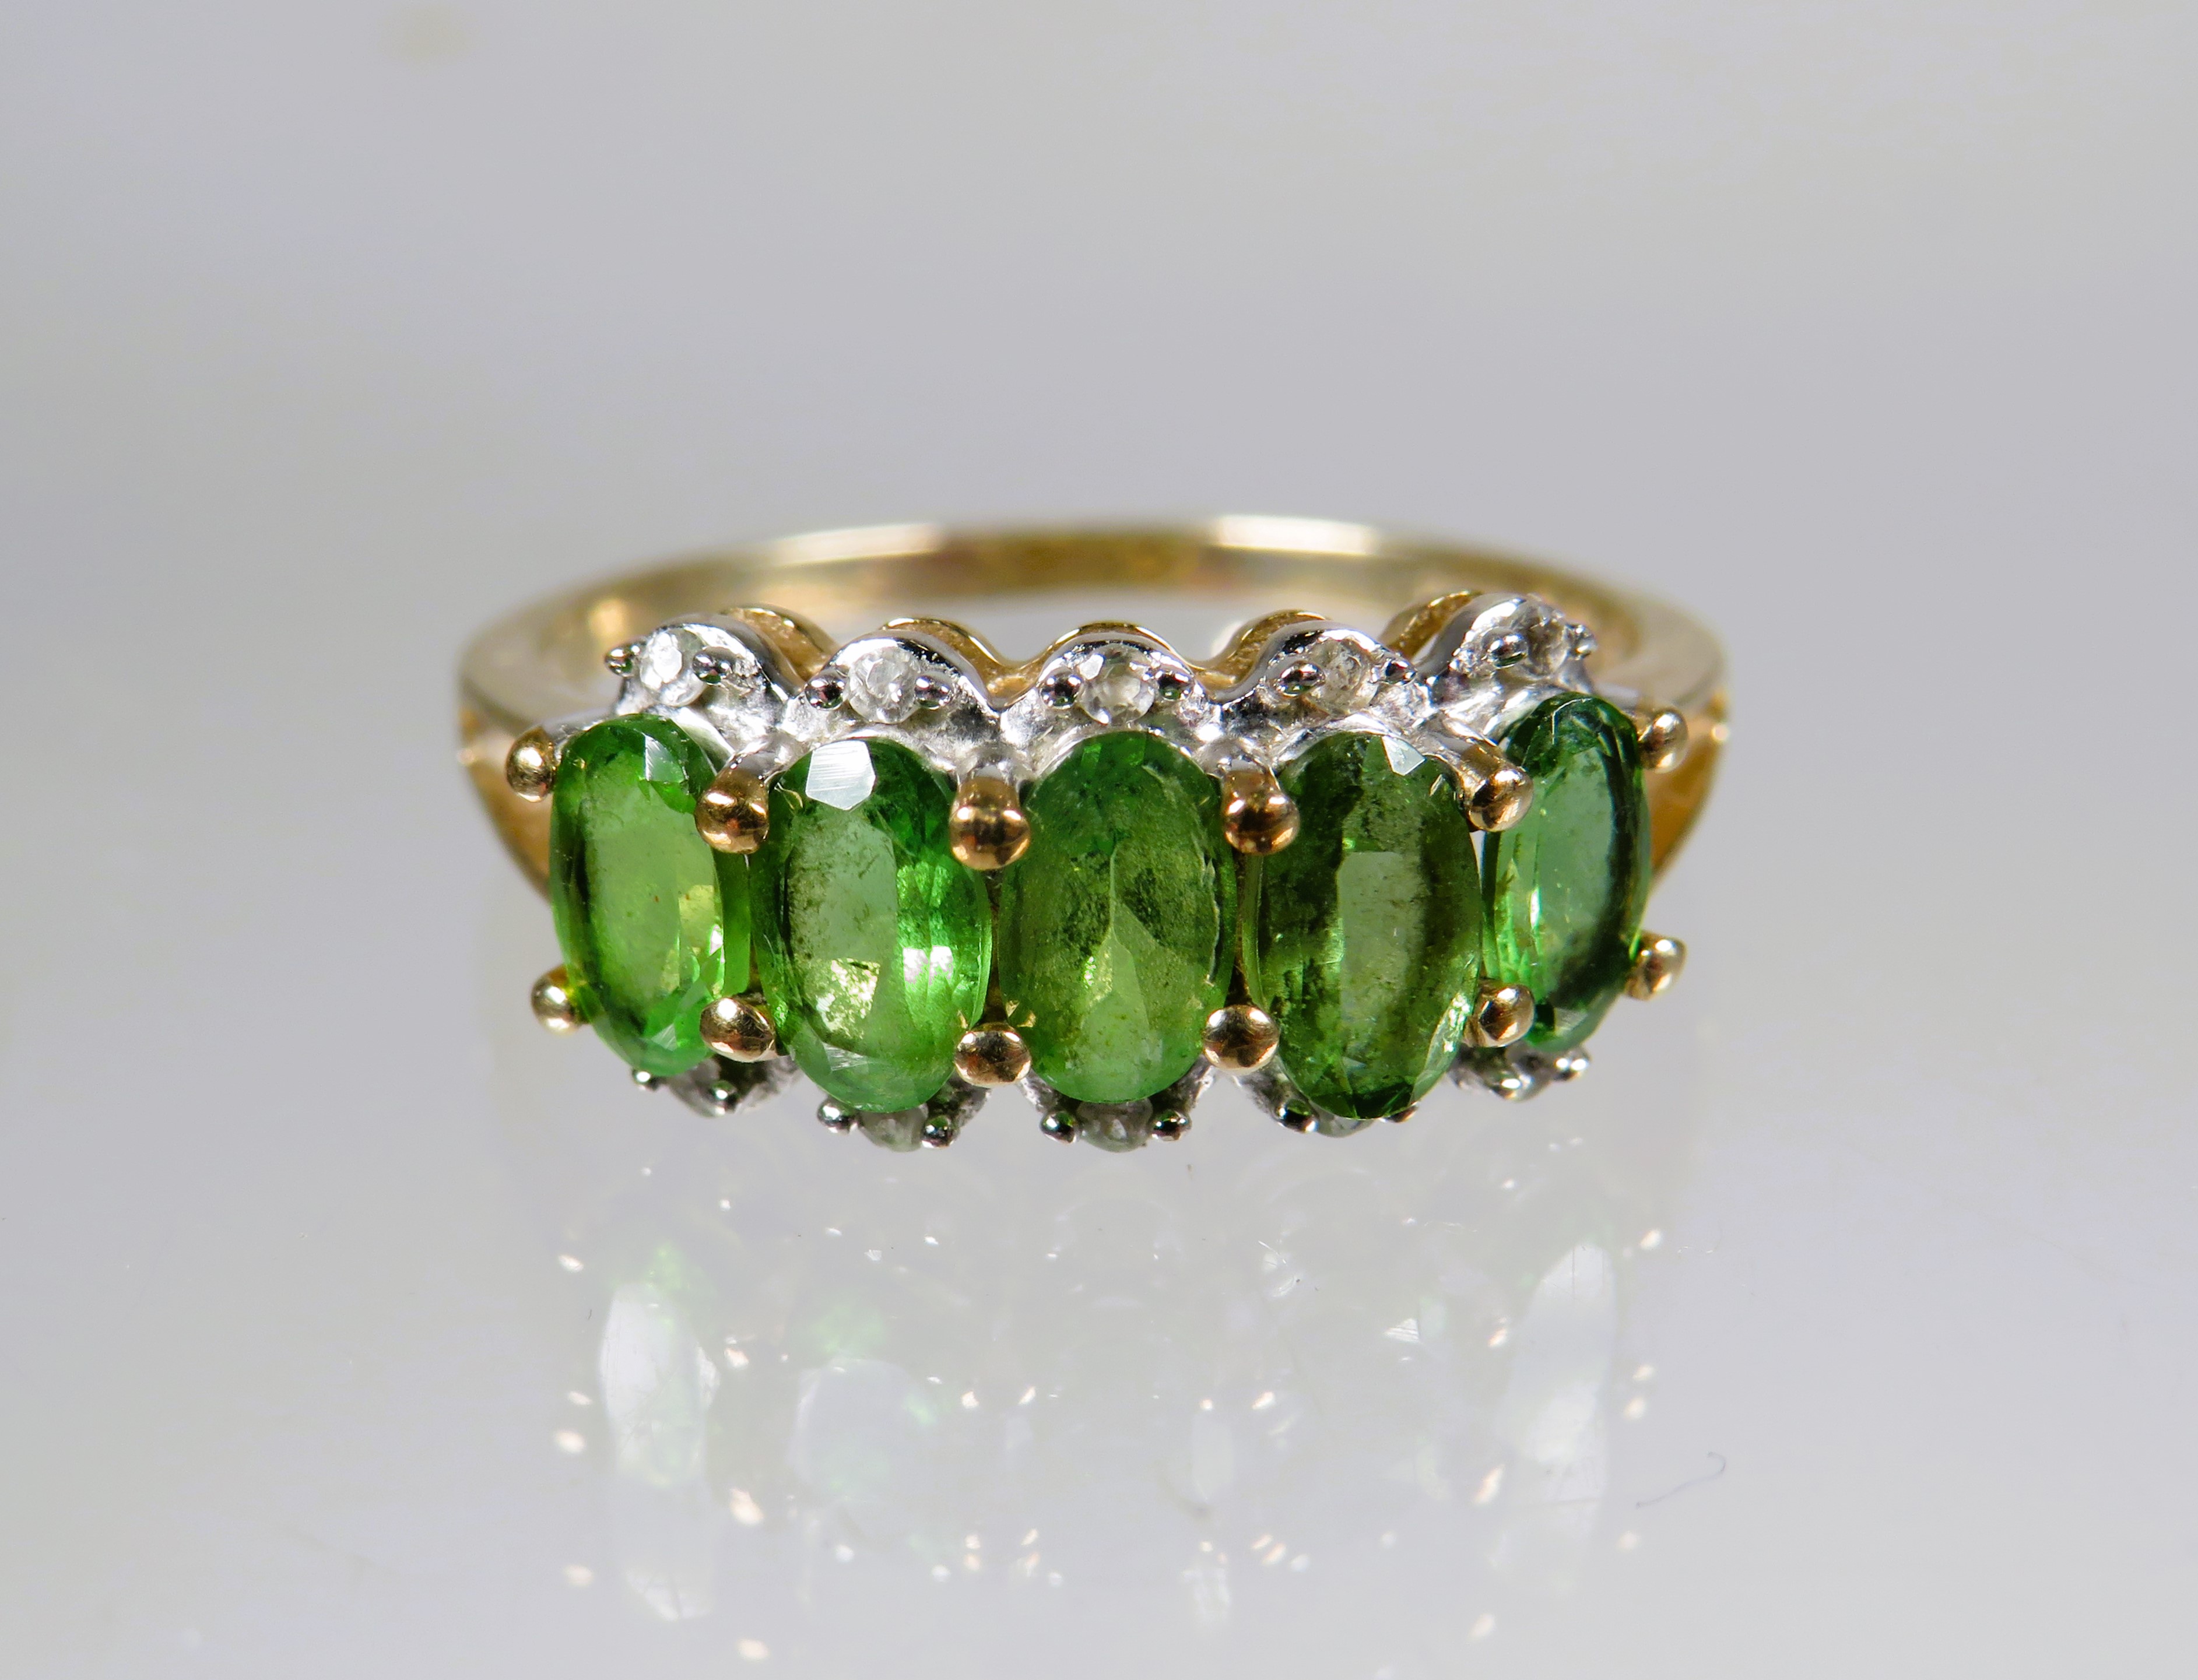 9ct Yellow Gold Ring set with a cluster of Green and Clear CZ gemstones.. Finger size 'M-5'   1.8g